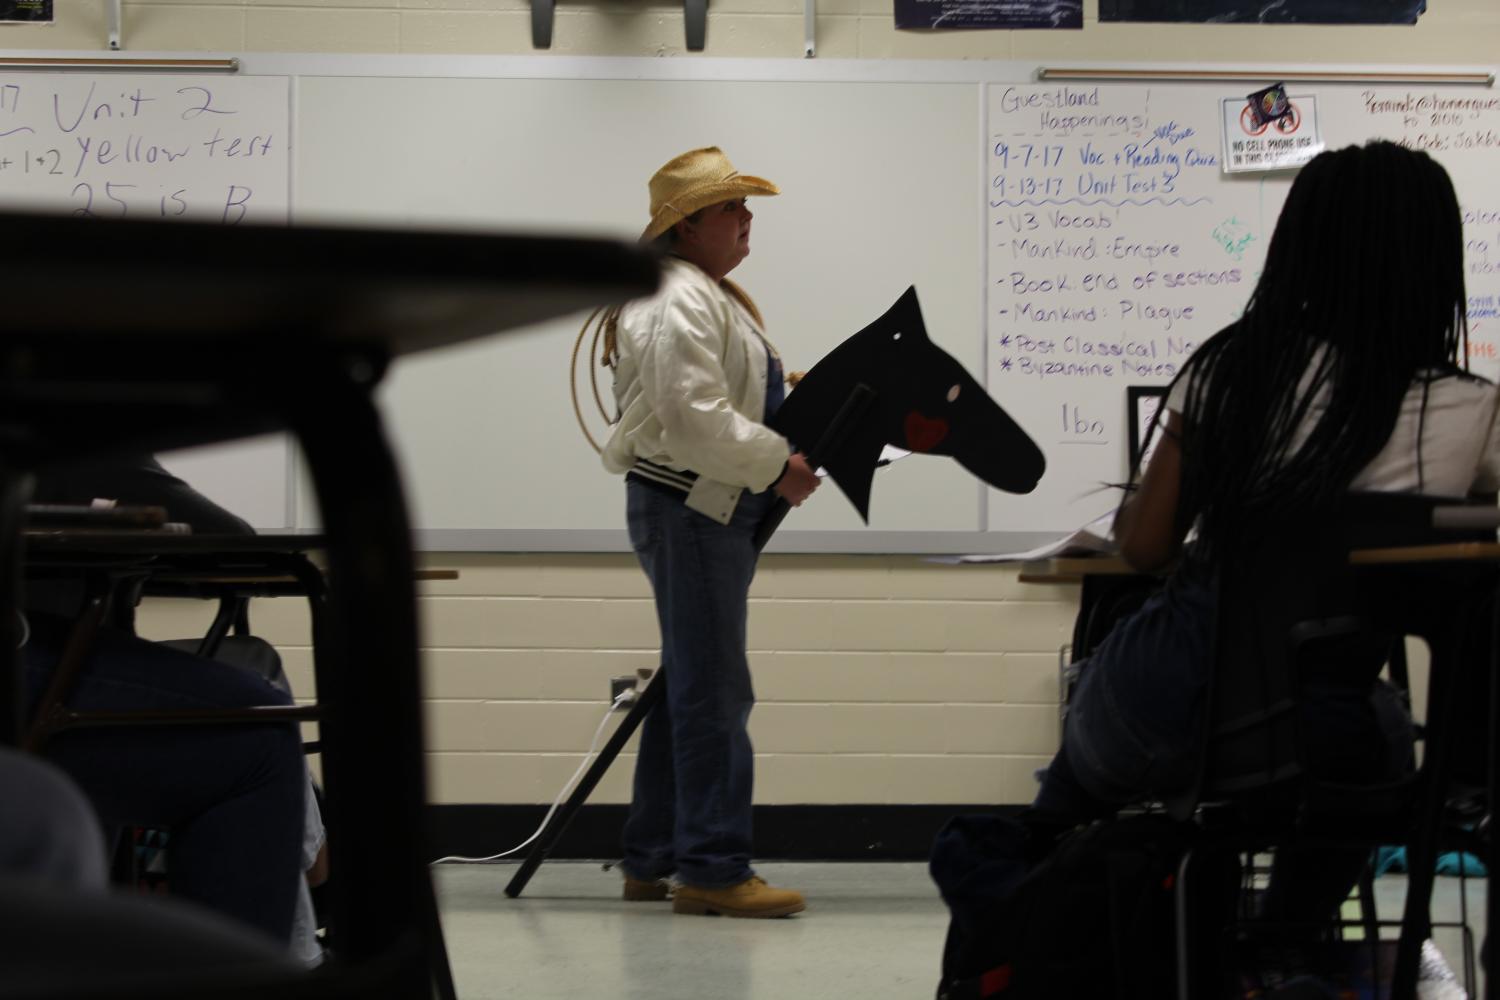 Unfortunately, this week was cut short by the hurricane, leaving only three days to celebrate NC’s homecoming. Instead of character day to kick off the theme week, students took a trip to the wild west. Dressed in her western gear with complete with a rope and cowboy hat, ninth-grade teacher Ms.Guest saddled up for today’s western theme.